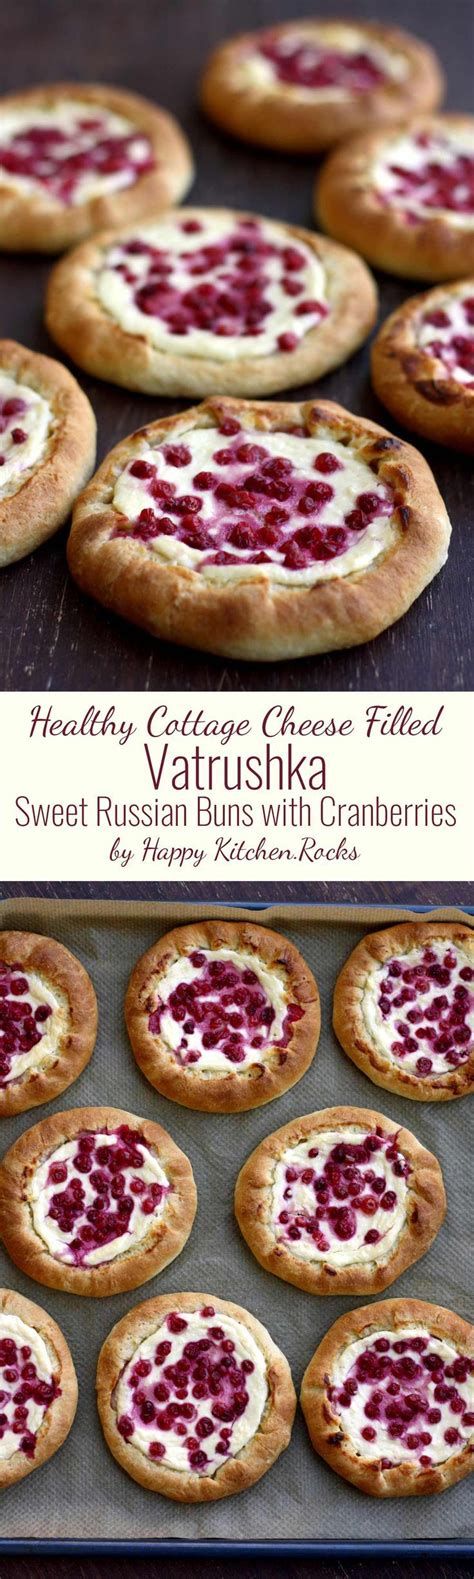 25 bake sale desserts that will sell out fast! Easy Russian Vatrushka Recipe: Delicious, fluffy and ...